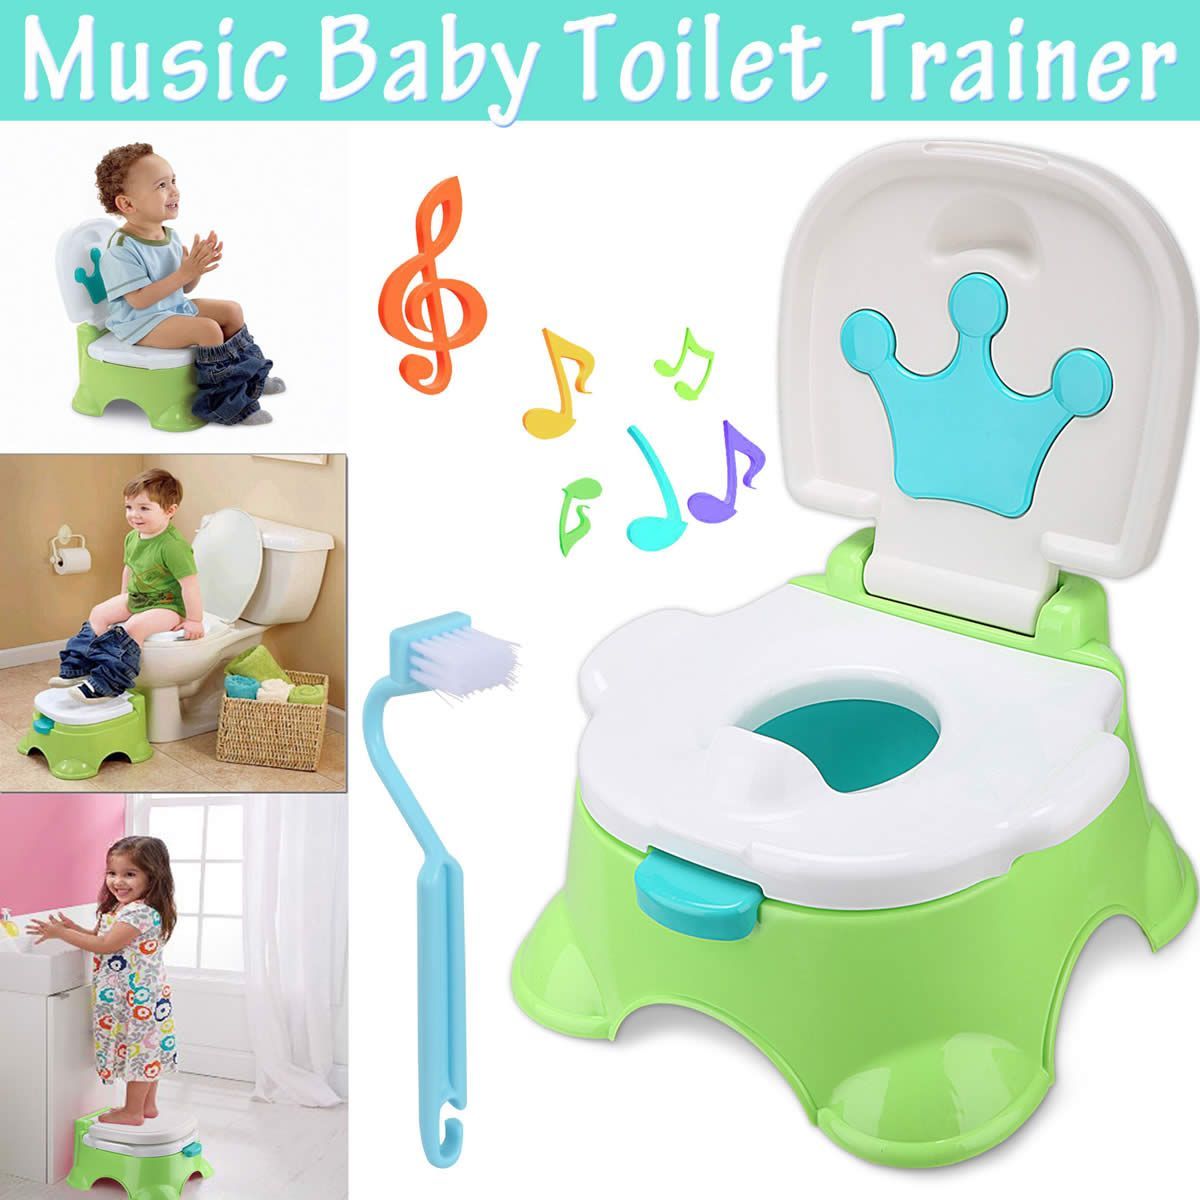 3-in-1 Toddler Baby Toilet Trainer Music Potty Training Seat | Crazy Sales